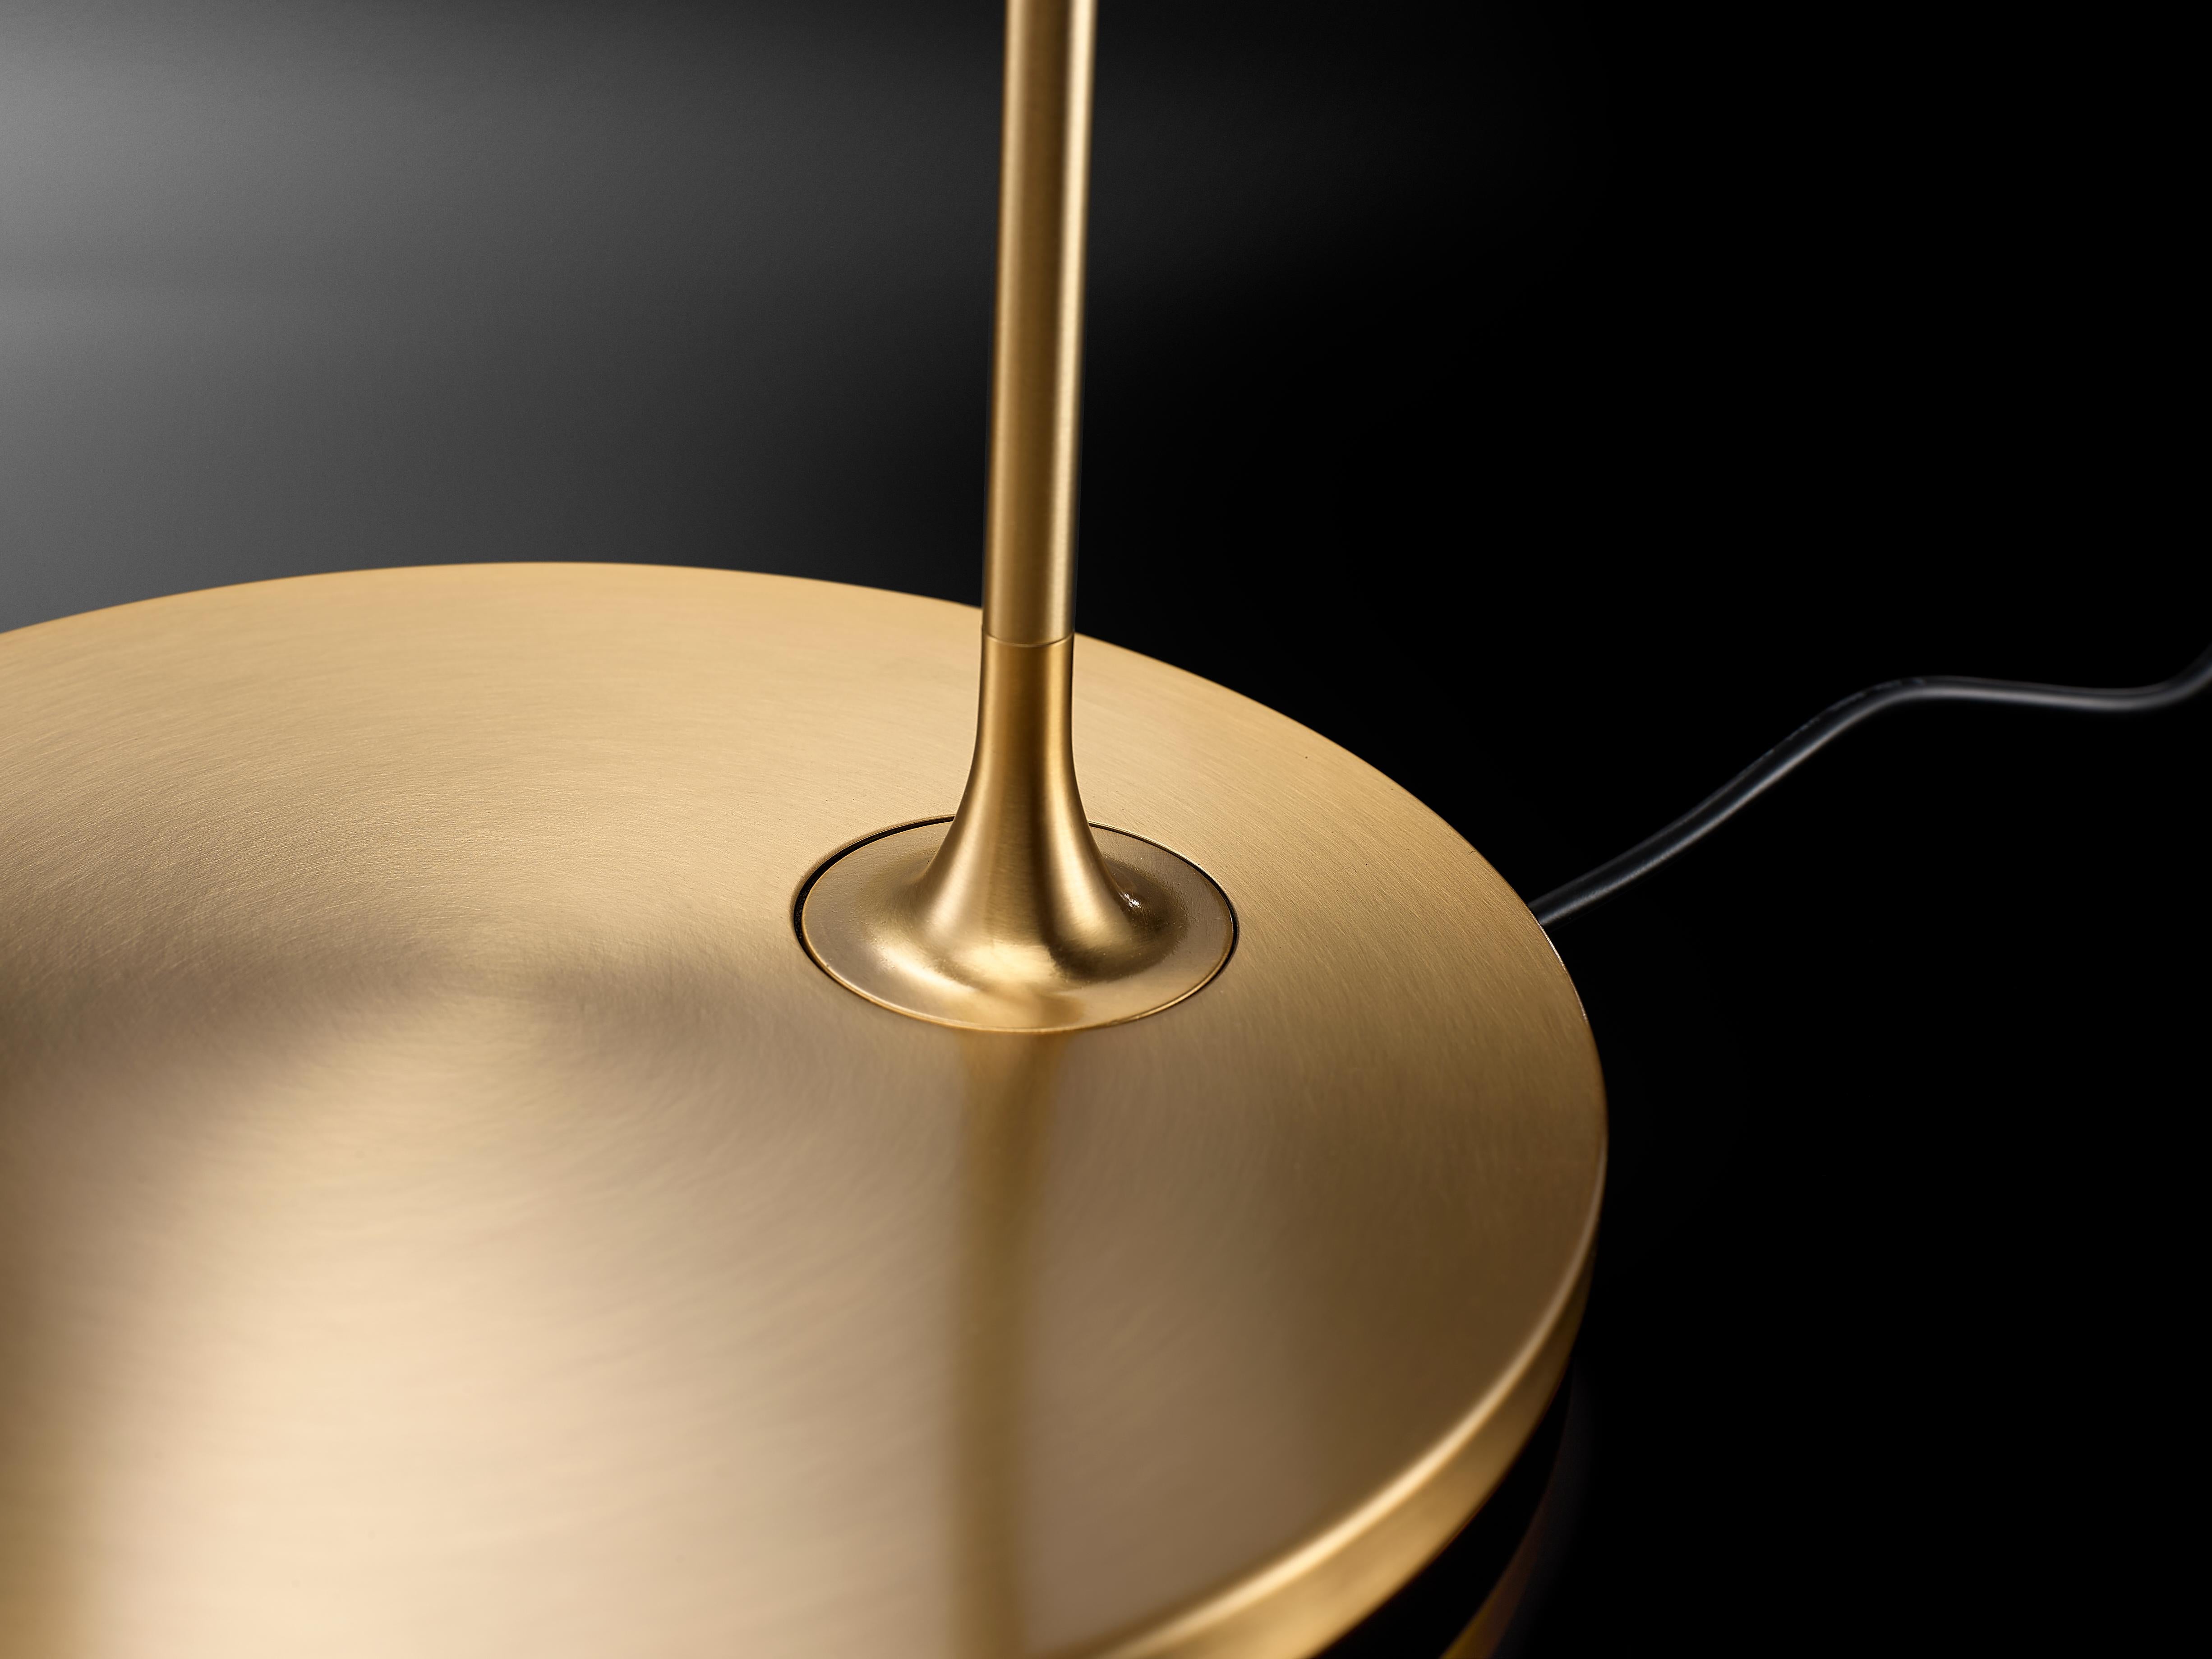 
Flo Desk Gold
Daphine and Flo, two of our most important icons, are now enriched with a new special semi-gloss brushed “yellow Gold” finish, which lends them uniqueness and prestige.
The special gilding treatment, which accentuates the brilliance